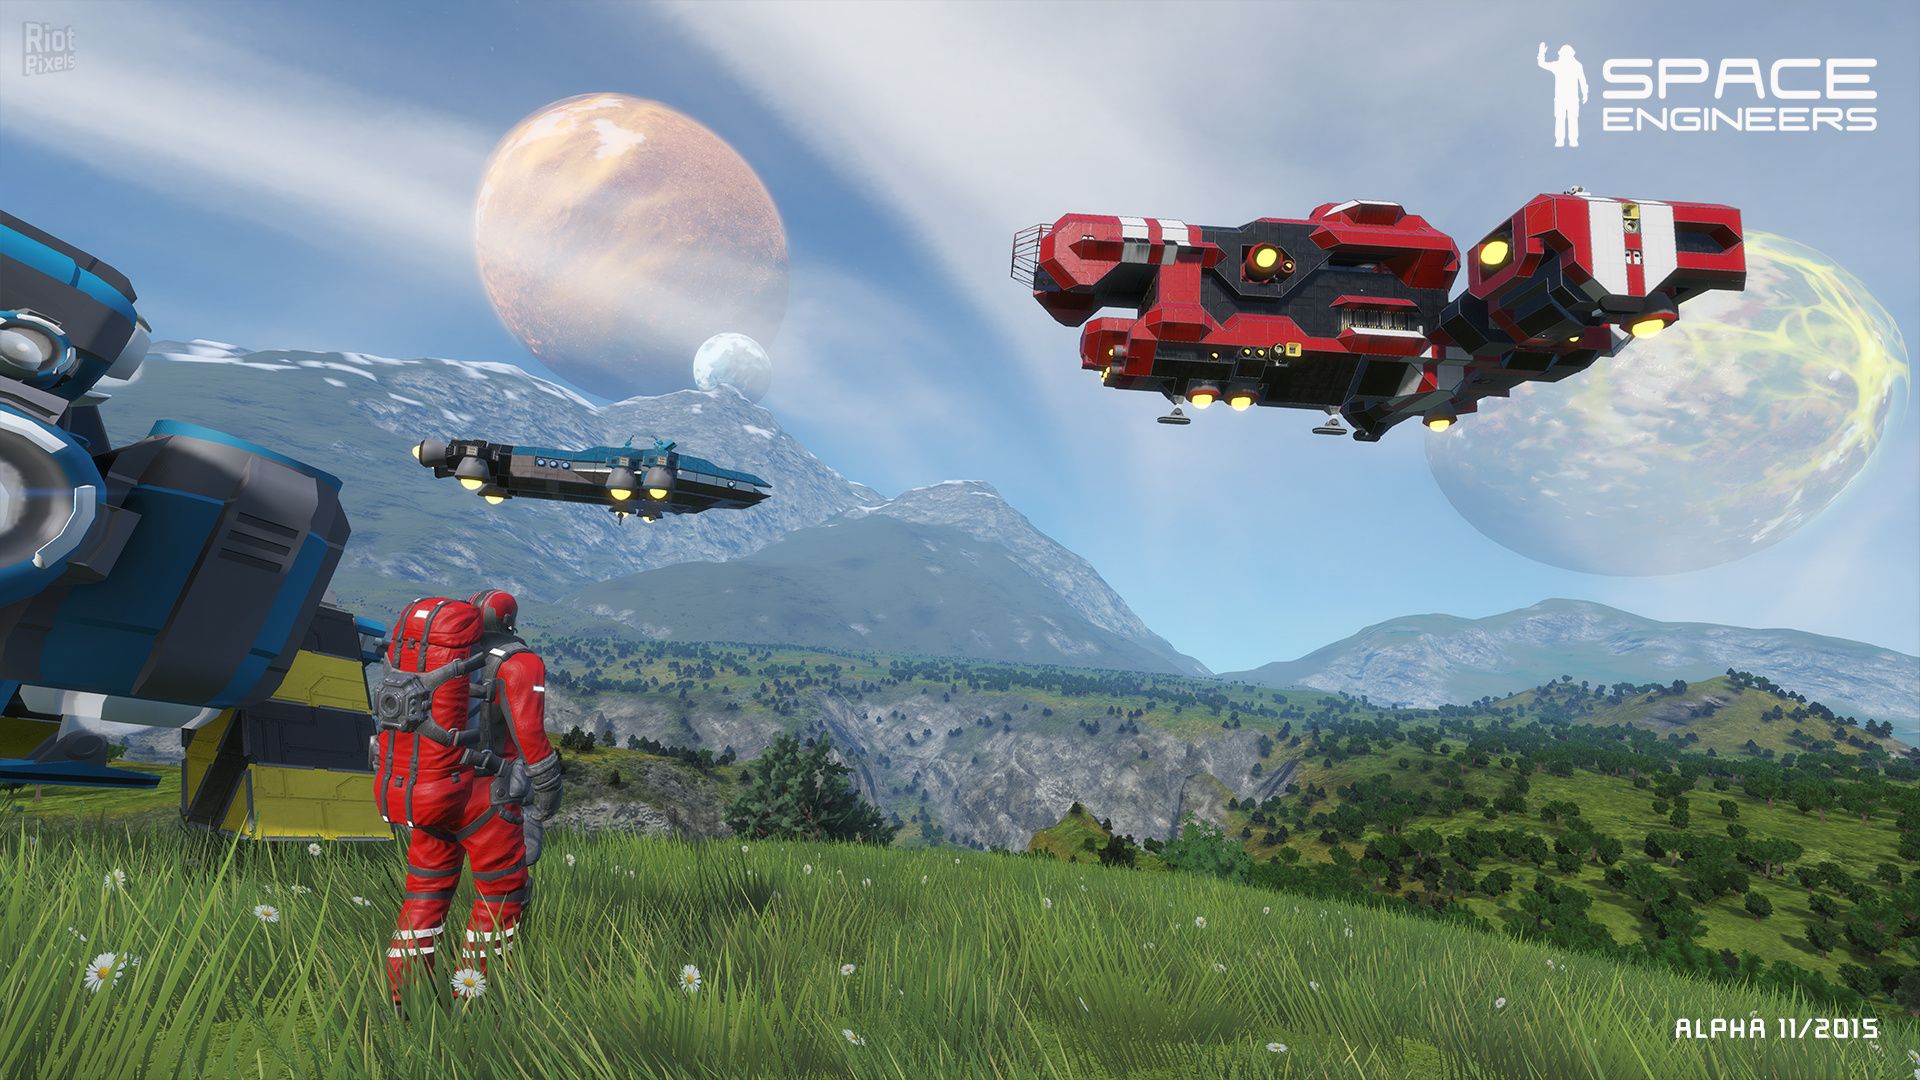 Space Engineers screenshots at Riot Pixels, image